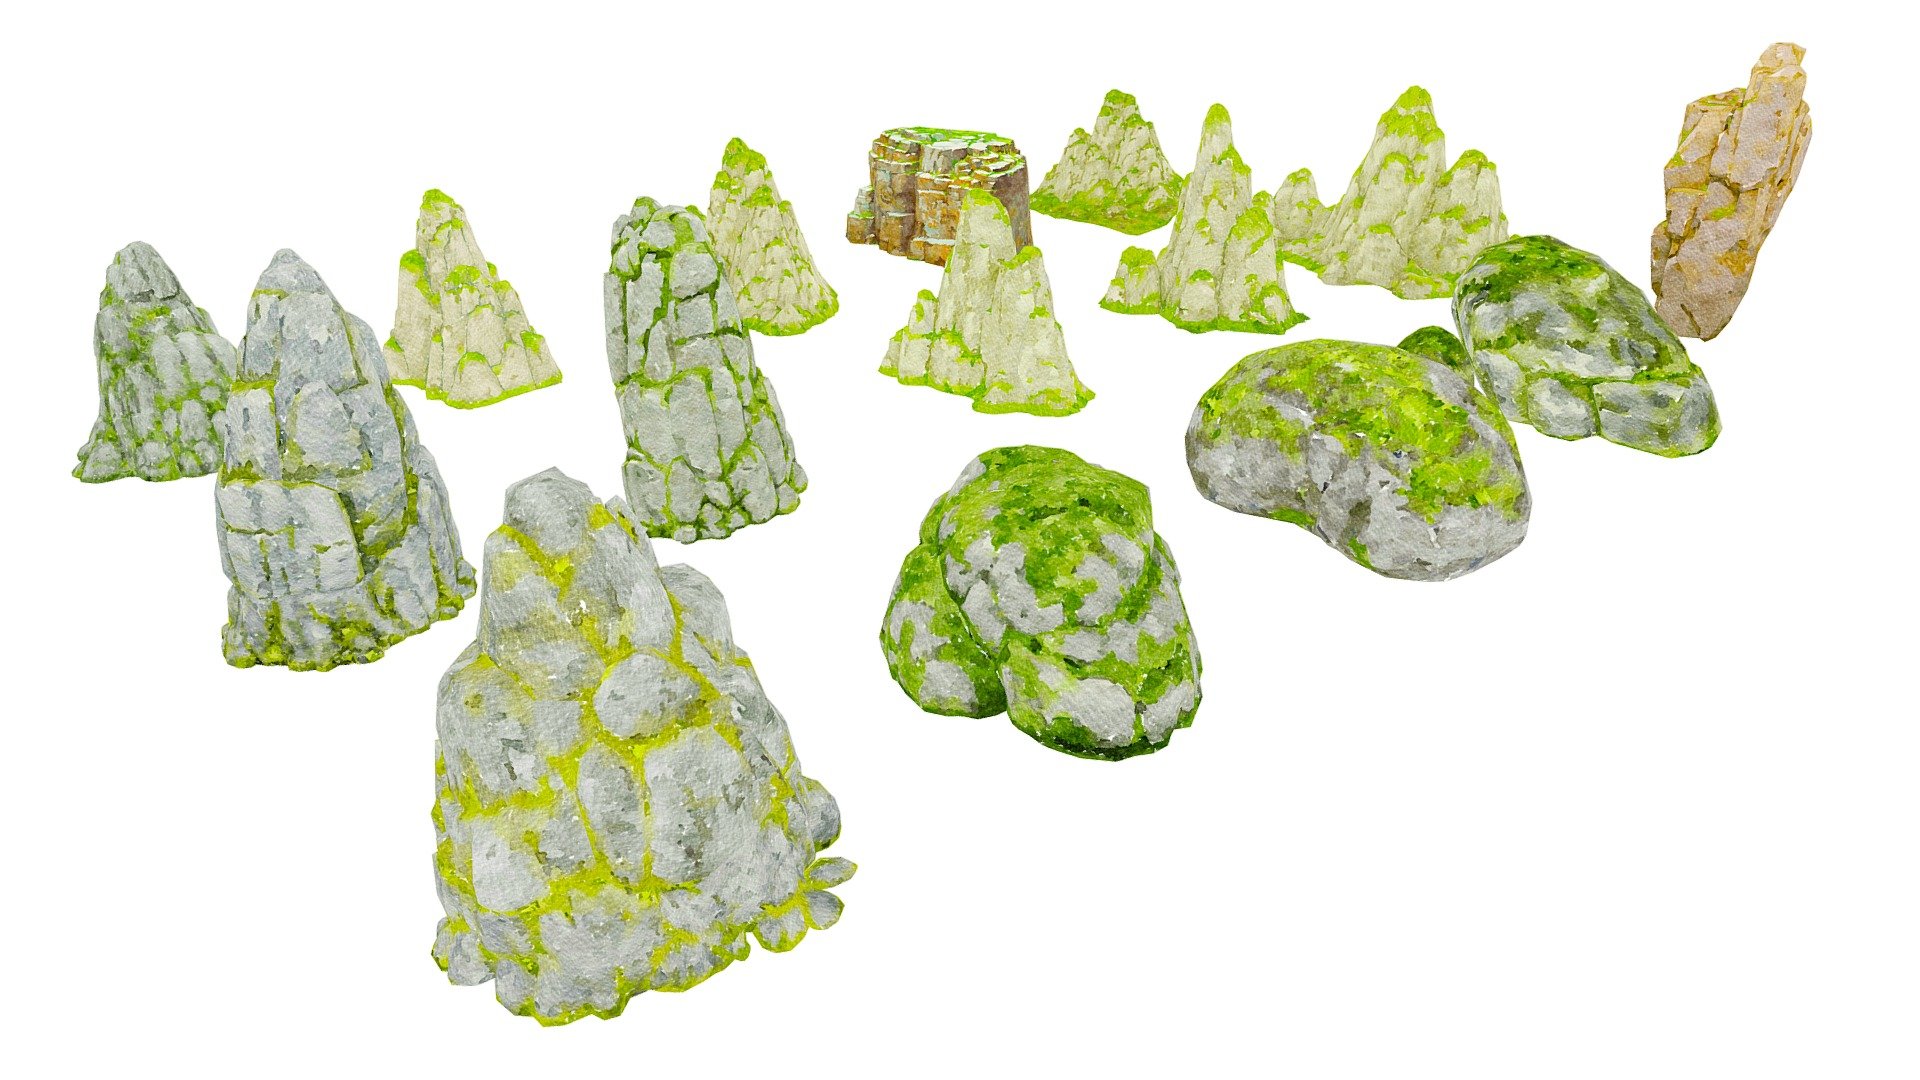 A package of low polygonal Rocks.The package contains 15 objects

Rock 1: 8806 Poly, 4472 Vert
Rock 2: 4997 Poly, 2535 Vert
Rock 3: 4631 Poly, 2373 Vert
Rock 4: 4738 Poly, 2423 Vert
Rock 5: 4802 Poly, 2479 Vert
Rock 6: 4589 Poly, 2365 Vert
Rock 7: 1563 Poly, 1398 Vert
Rock 8: 1263 Poly, 1017 Vert
Rock 9: 1186 Poly, 1147 Vert
Rock 10: 871 Poly, 865 Vert
Rock 11: 403 Poly, 312 Vert
Rock 12: 481 Poly, 328 Vert
Rock 13: 1029 Poly, 902 Vert
Rock 14: 700 Poly, 543 Vert
Rock 15: 476 Poly, 402 Vert




Only Textures Diffus duplicated in resolution 2048 x 2048. Format textures of PNG. Files include: 3Dsmax, 3Ds, Obj, Fbx and folder with textures. Ready import to game project (Unity, Unreal)
If there is a need for any type of model, send a message! We will provide. 
Thanks for your interest and love! 



Note: Watercolor style illustrations 
It is recommended to use flat lighting or shaderless material - Rock Illustration Collection Part 1 - 3D model by josluat91 3d model